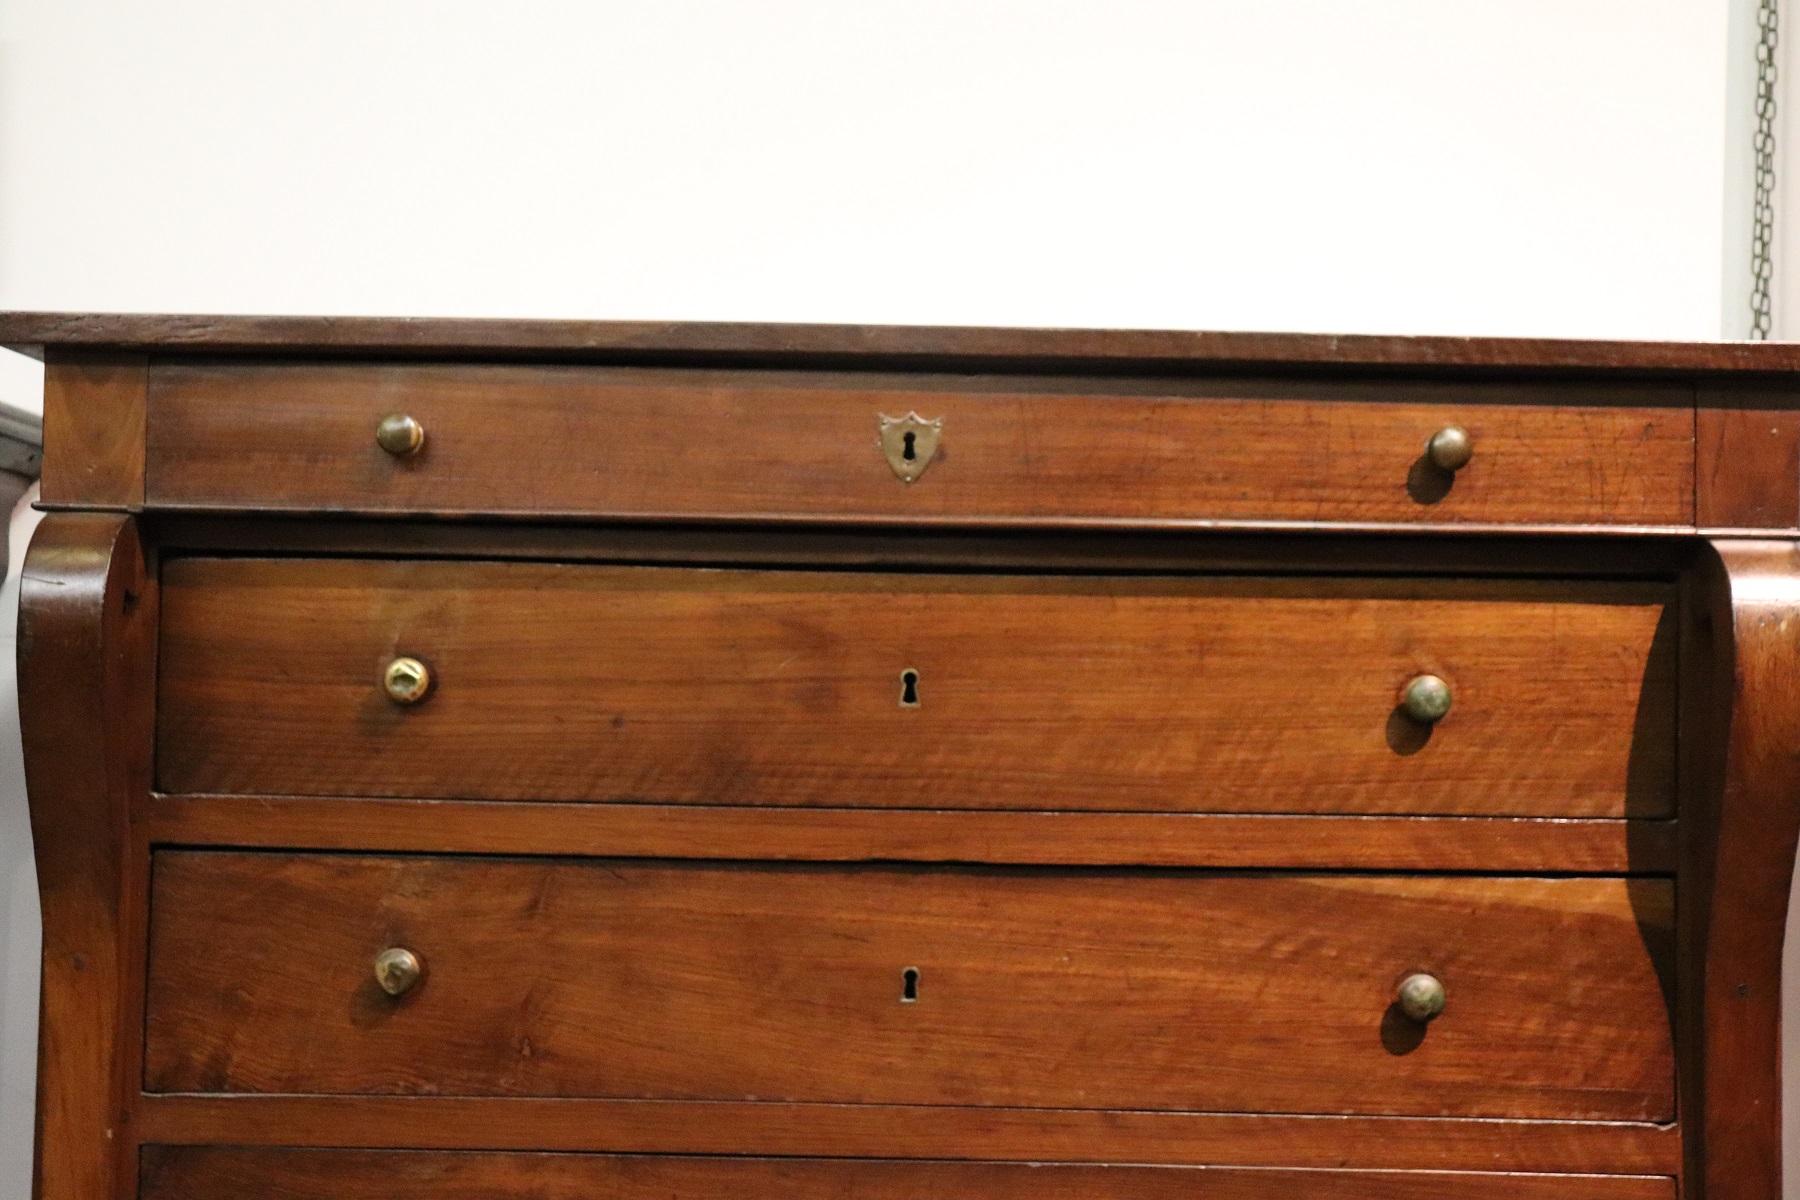 Important antique Italian Empire chest of drawers 1810s walnut wood. The commode is very refined linear and elegant. On the front two decorative pilasters. The walnut wood has a beautiful patina. On the front three large drawers and a smaller one.